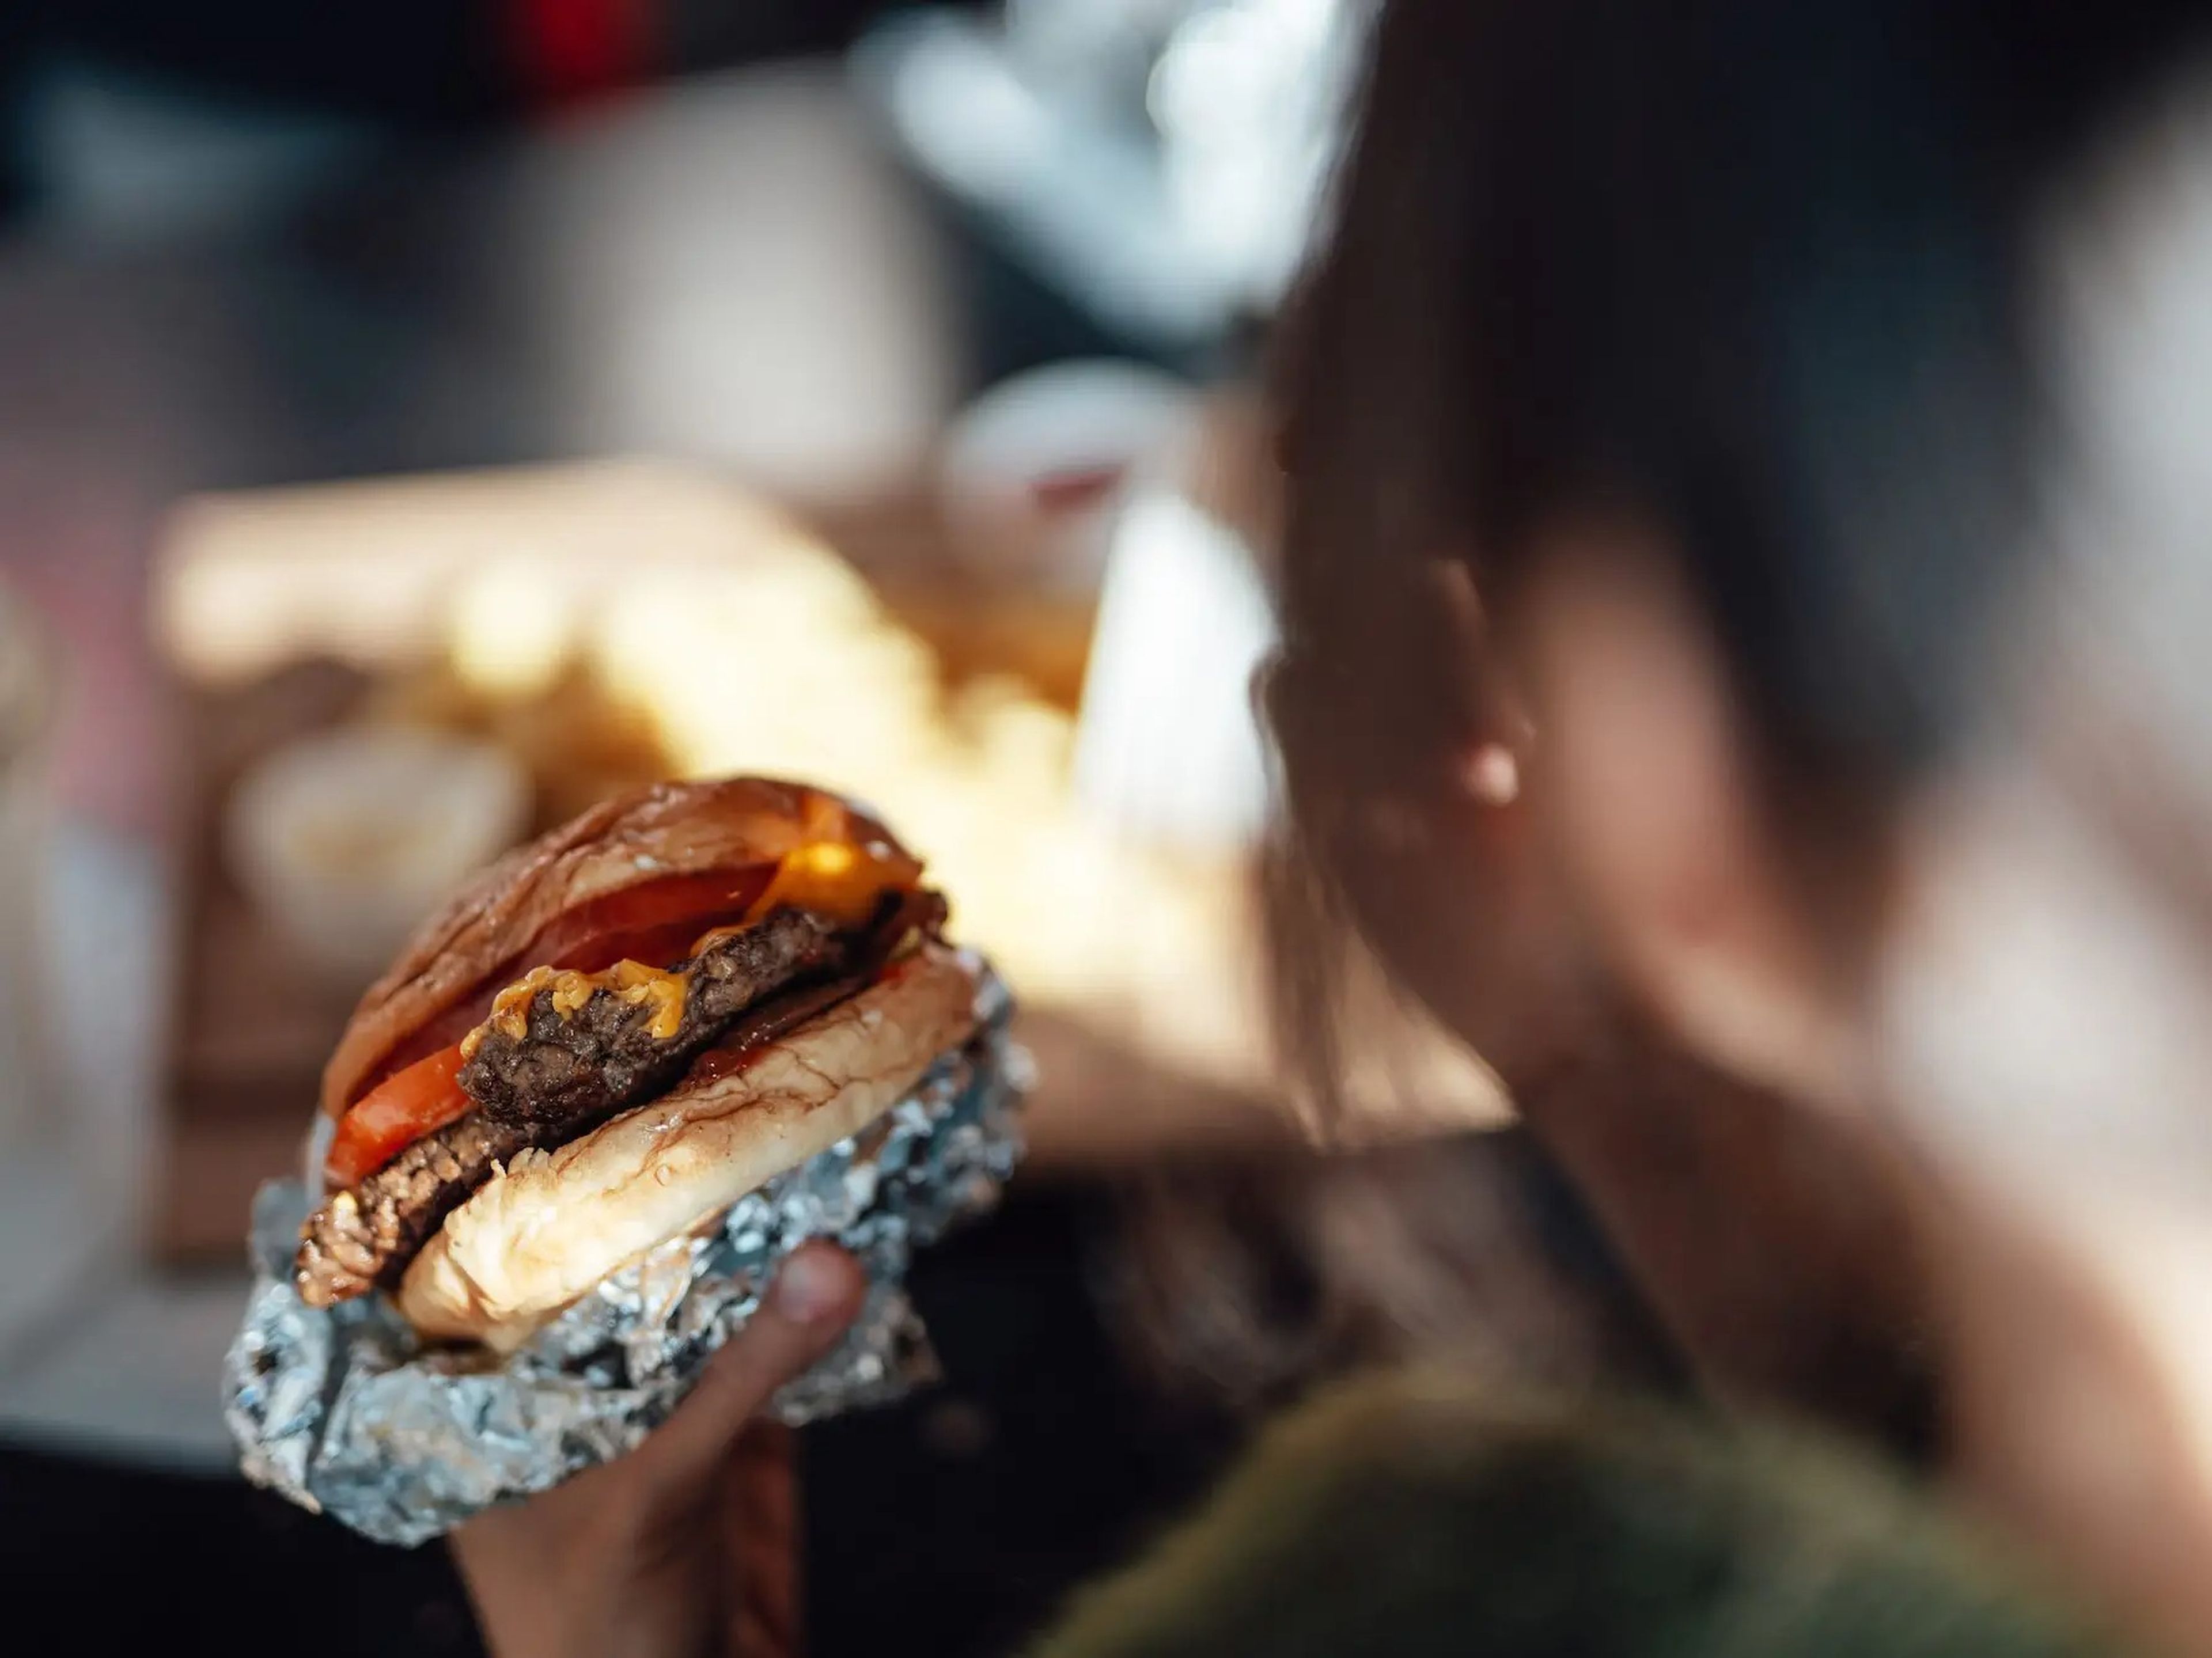 A burger is seen being held up ready to be eaten over a person's shoulder.